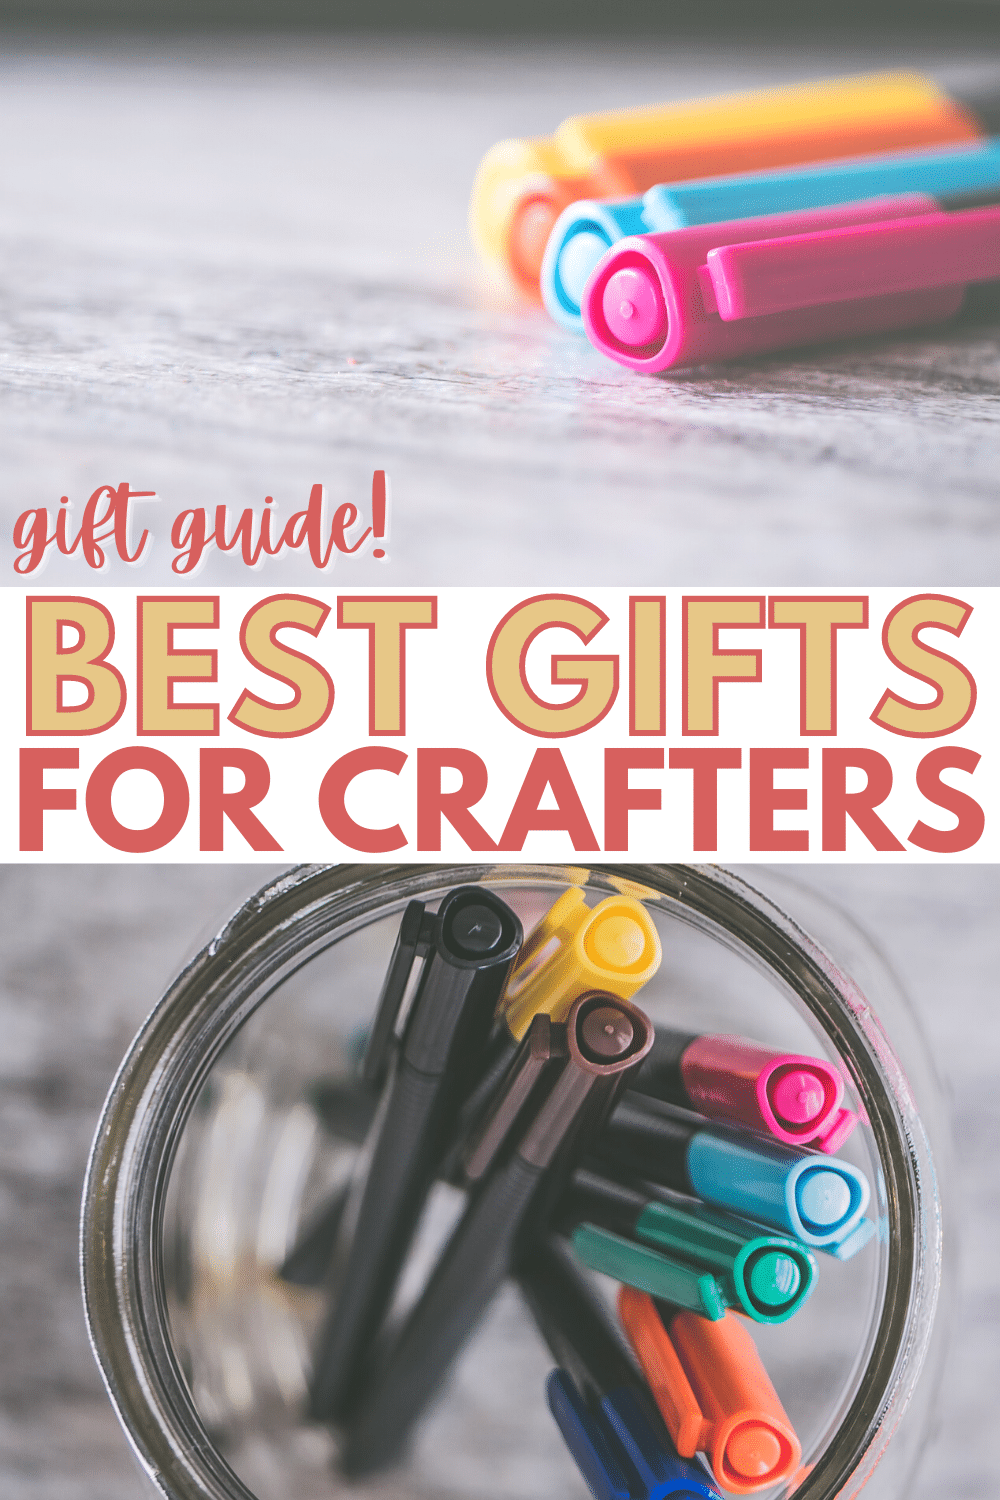 Crafty people can be hard to buy for since they can make almost anything! This list of the best gifts for crafters has plenty of options sure to please. #giftguide #giftideas #crafters via @wondermomwannab